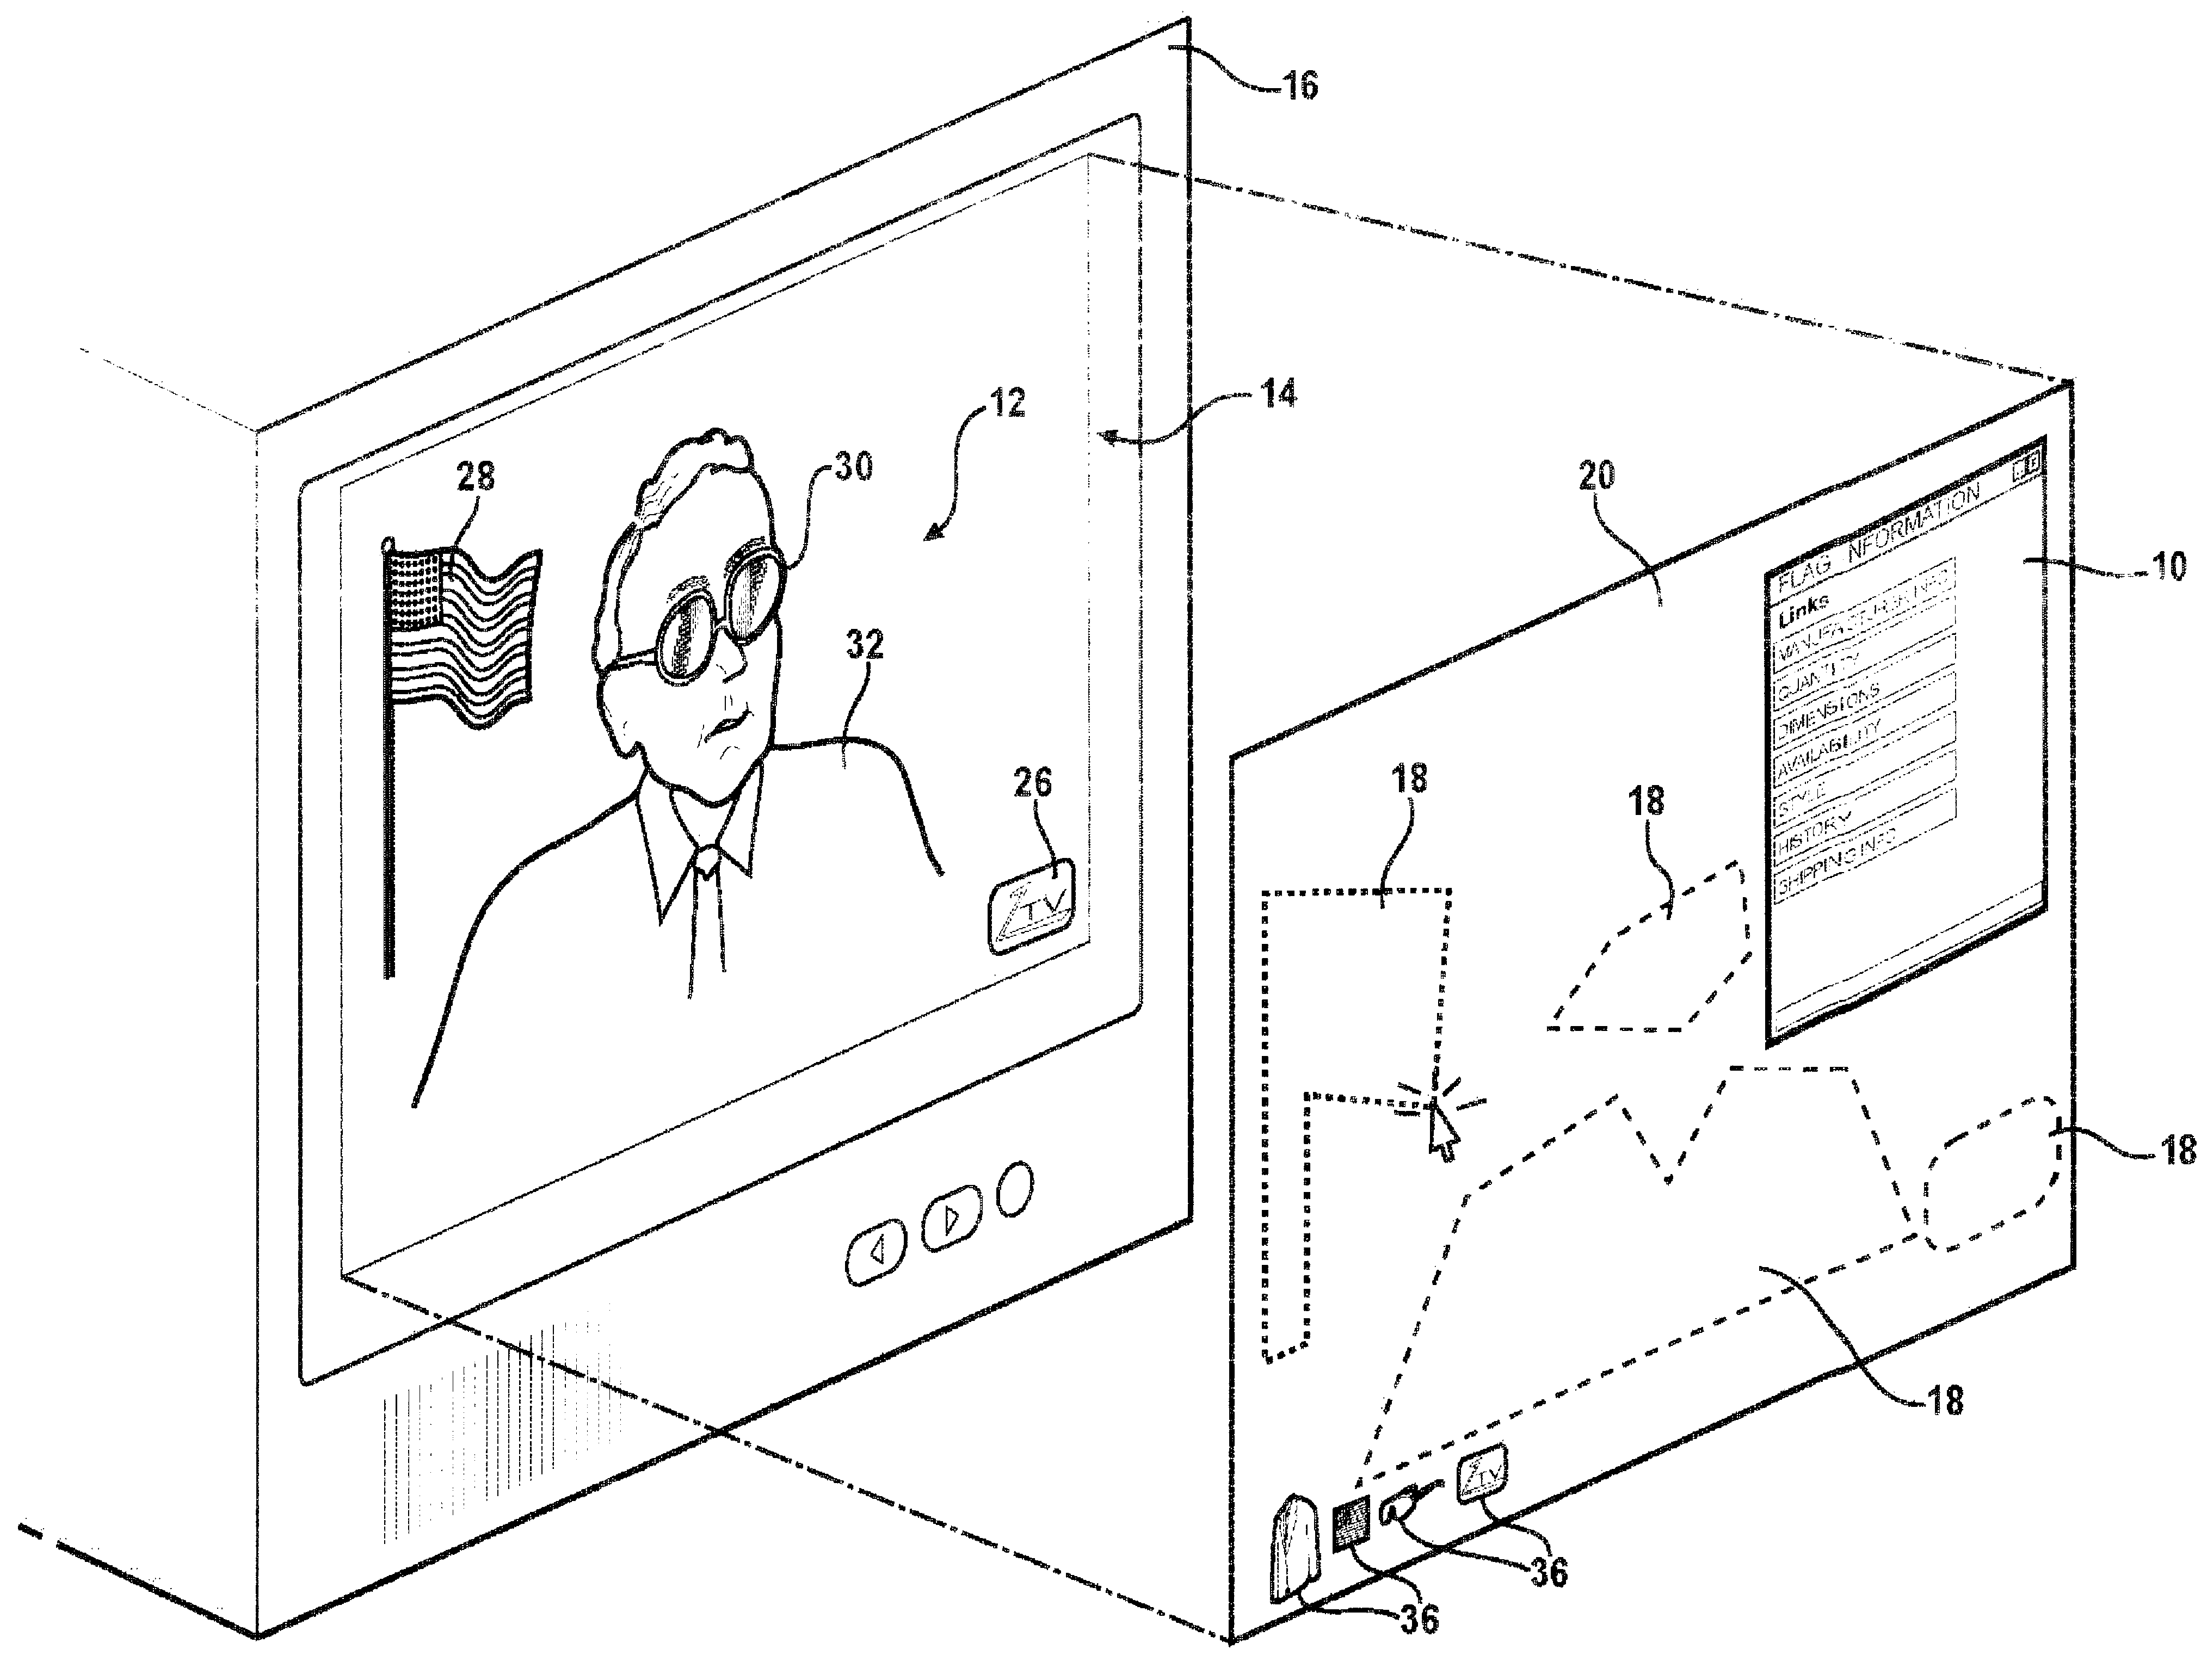 Method of retrieving information associated with an object present in a media stream